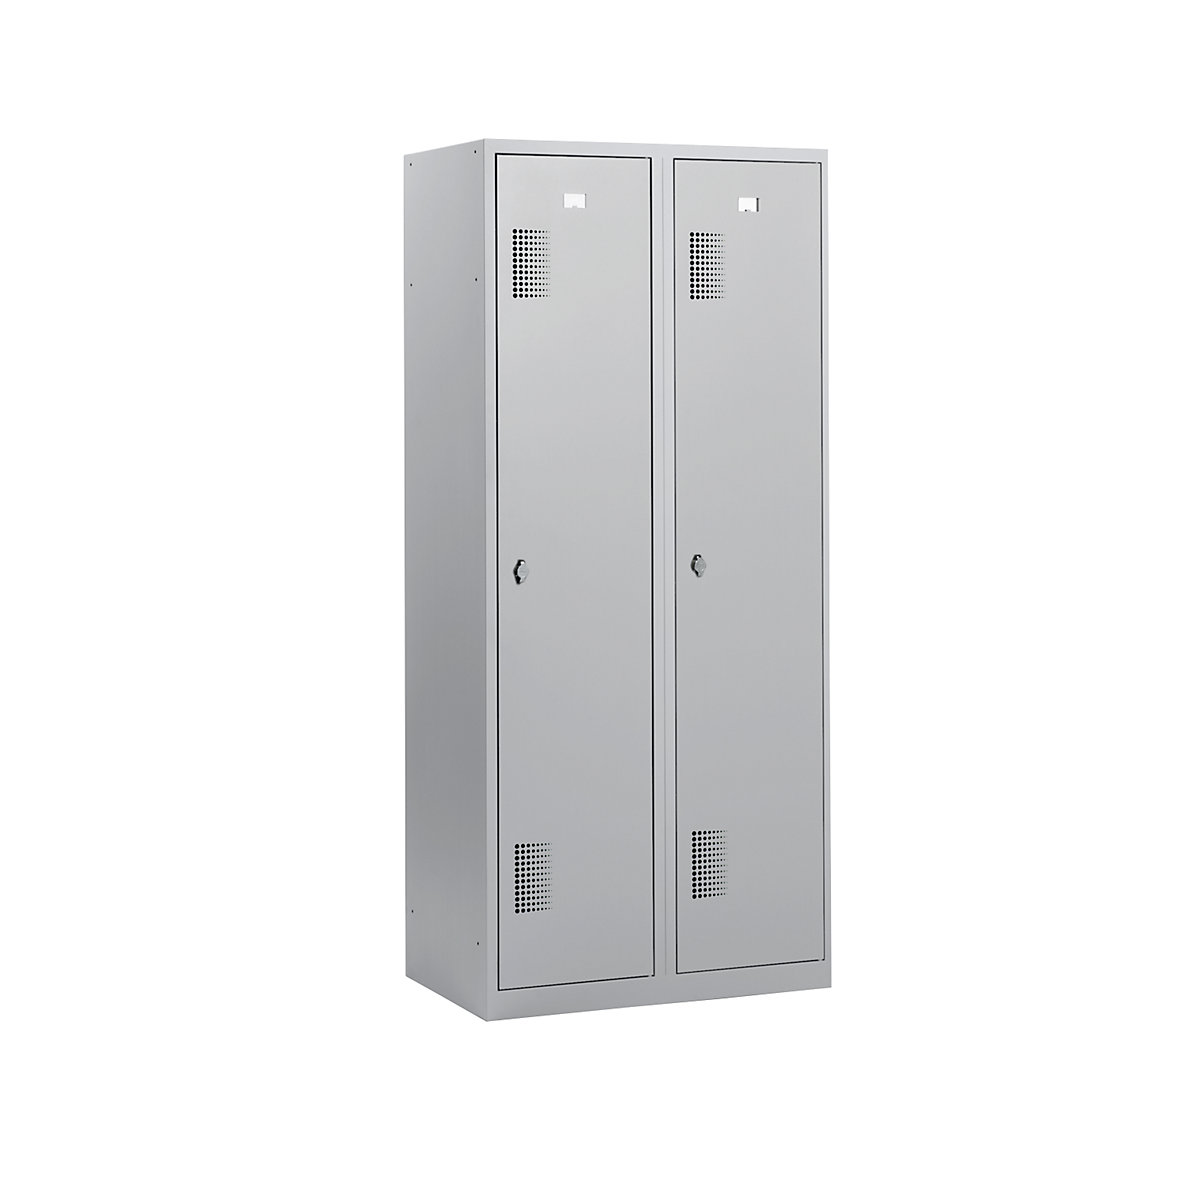 AMSTERDAM cloakroom locker – eurokraft basic, height 1800 mm, width 800 mm, 2 x 398 mm wide compartments, with fittings for padlock, completely light grey-5